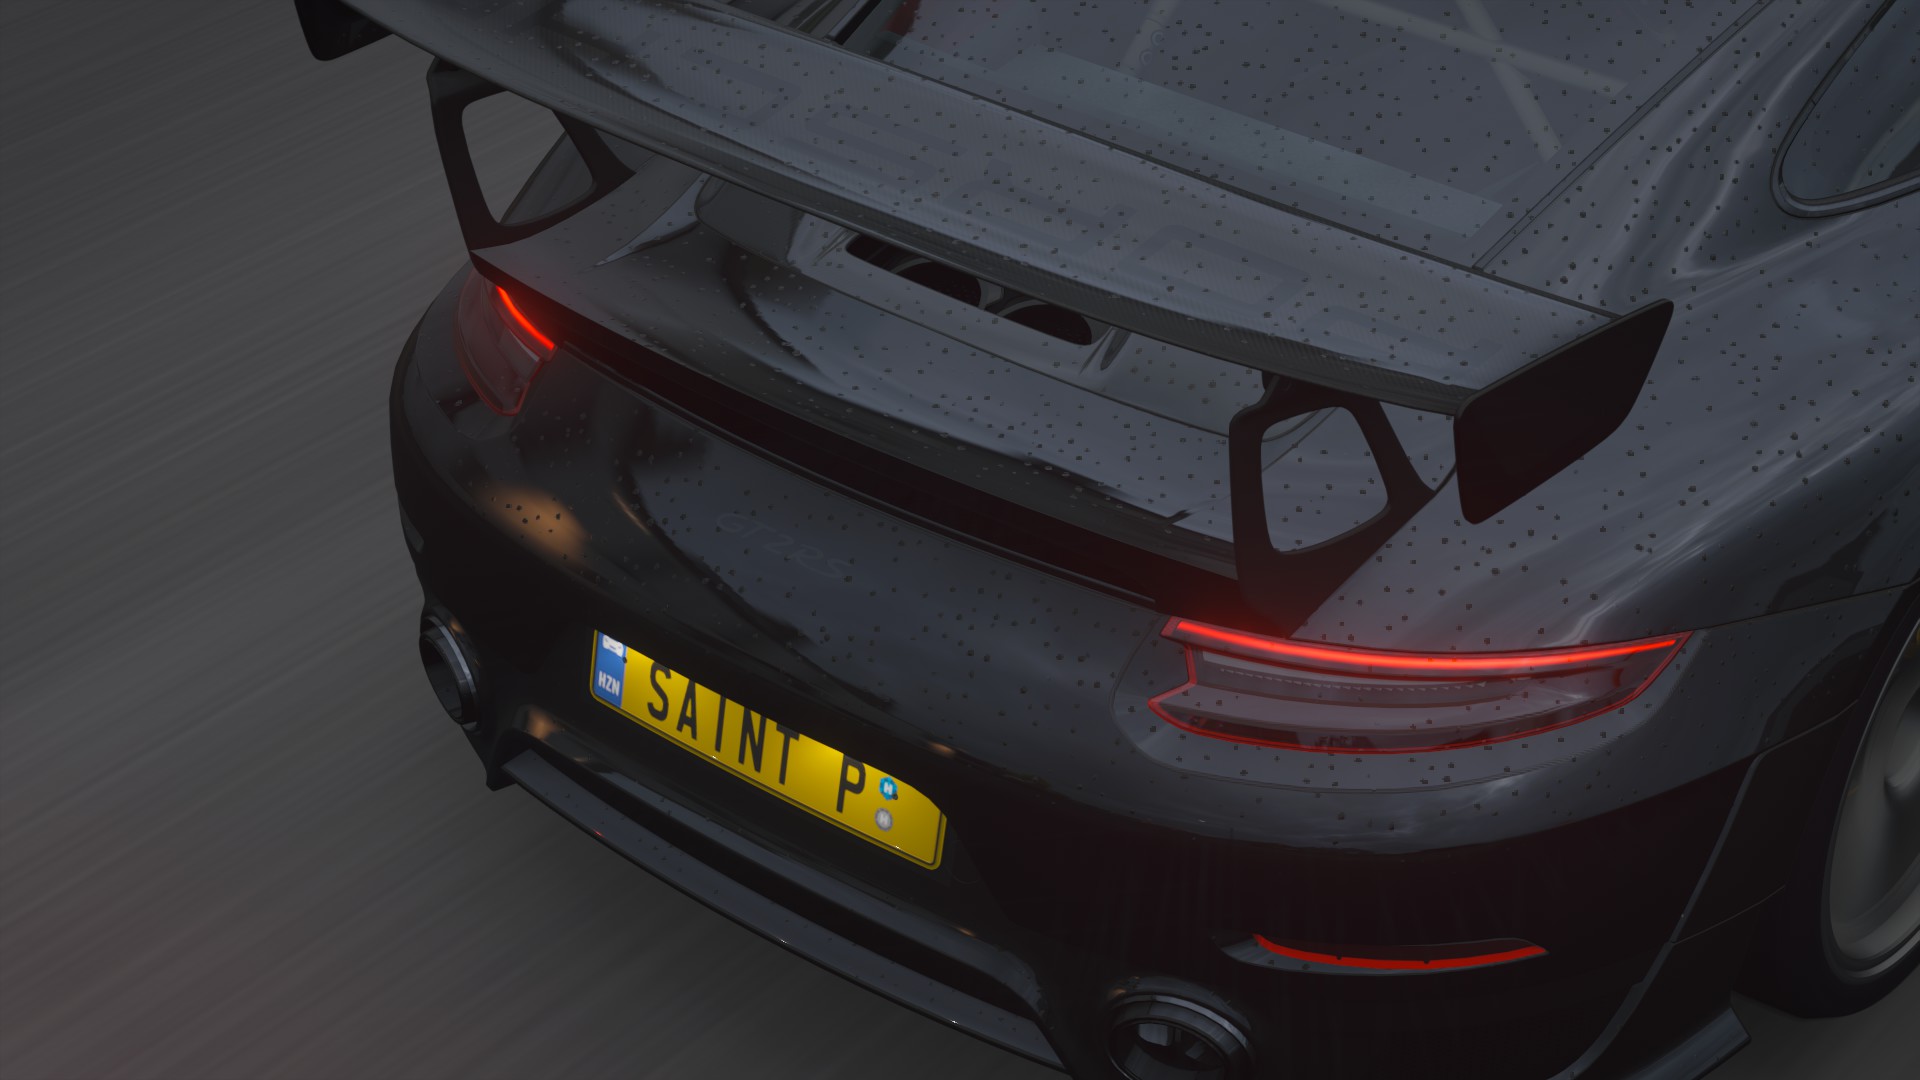 General 1920x1080 motion blur digital art CGI car vehicle Forza Forza Horizon 4 taillights rear view licence plates video games driving video game art high angle